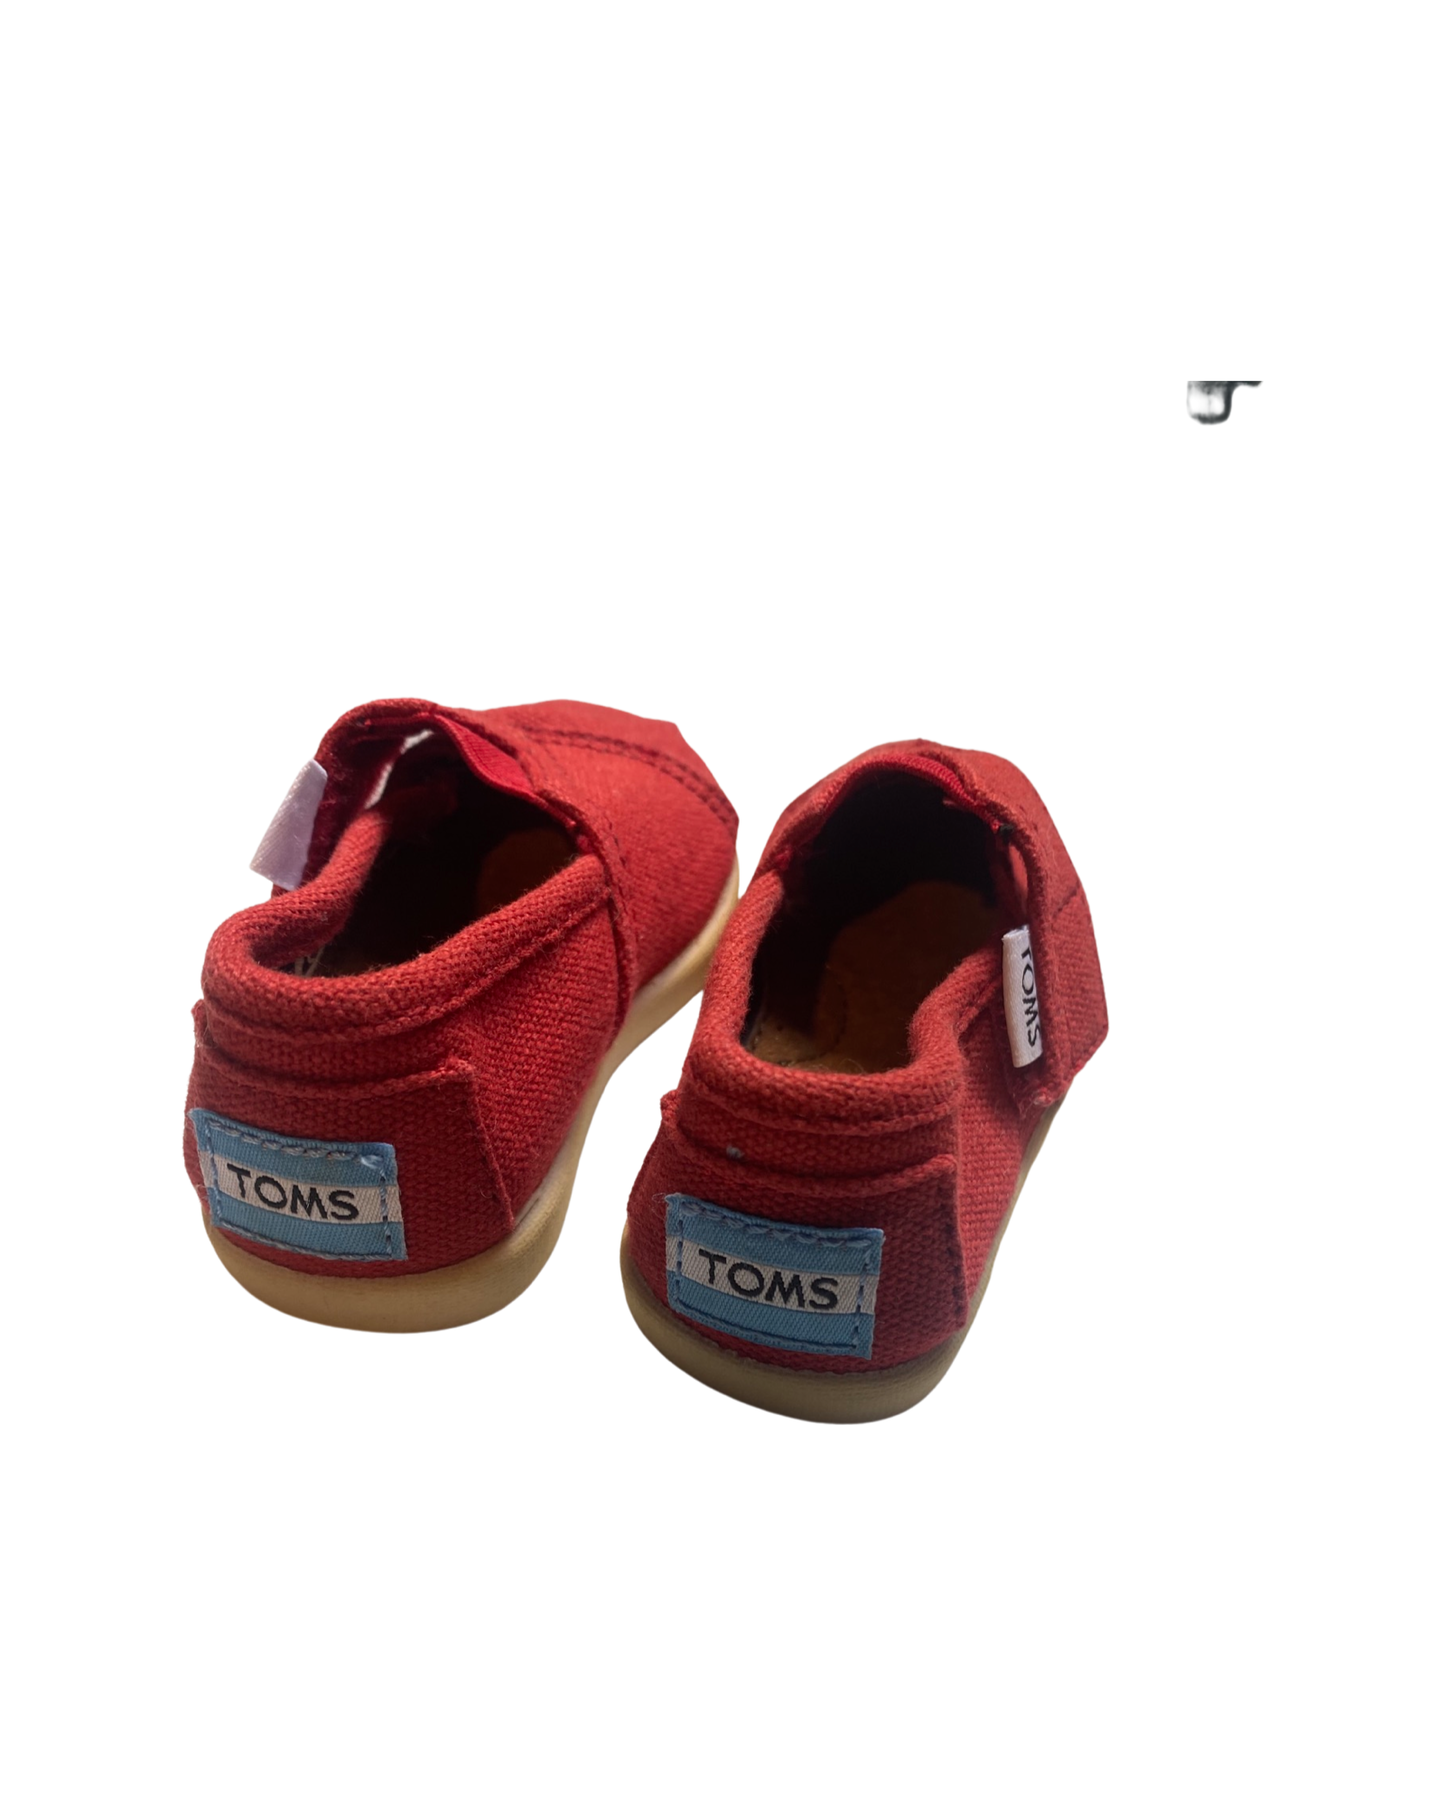 Toms classic tiny alpargata loafers in Red (size T2/UK1.5)